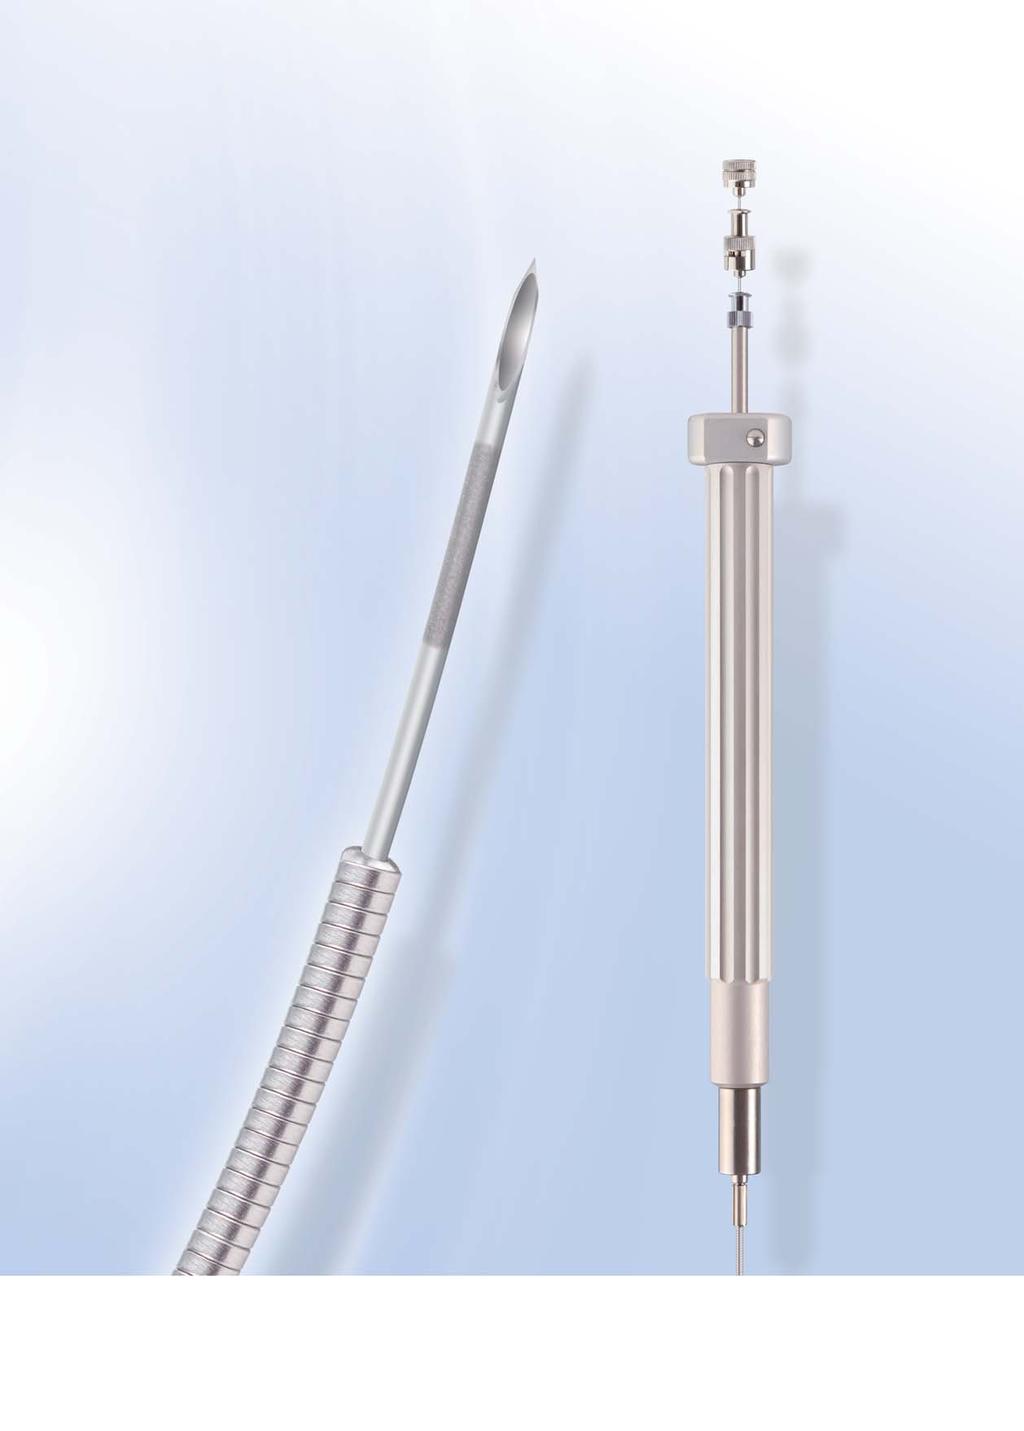 Endoscopic Ultrasound FNA Systems For Pentax Fibre Ultrasound Endoscopes FG-32UA, FG-34UX, FG-36UX & FG-38UX Endoscopic Ultrasound Hancke-Vilmann FNA Systems Reusable Components (Handle & Metal